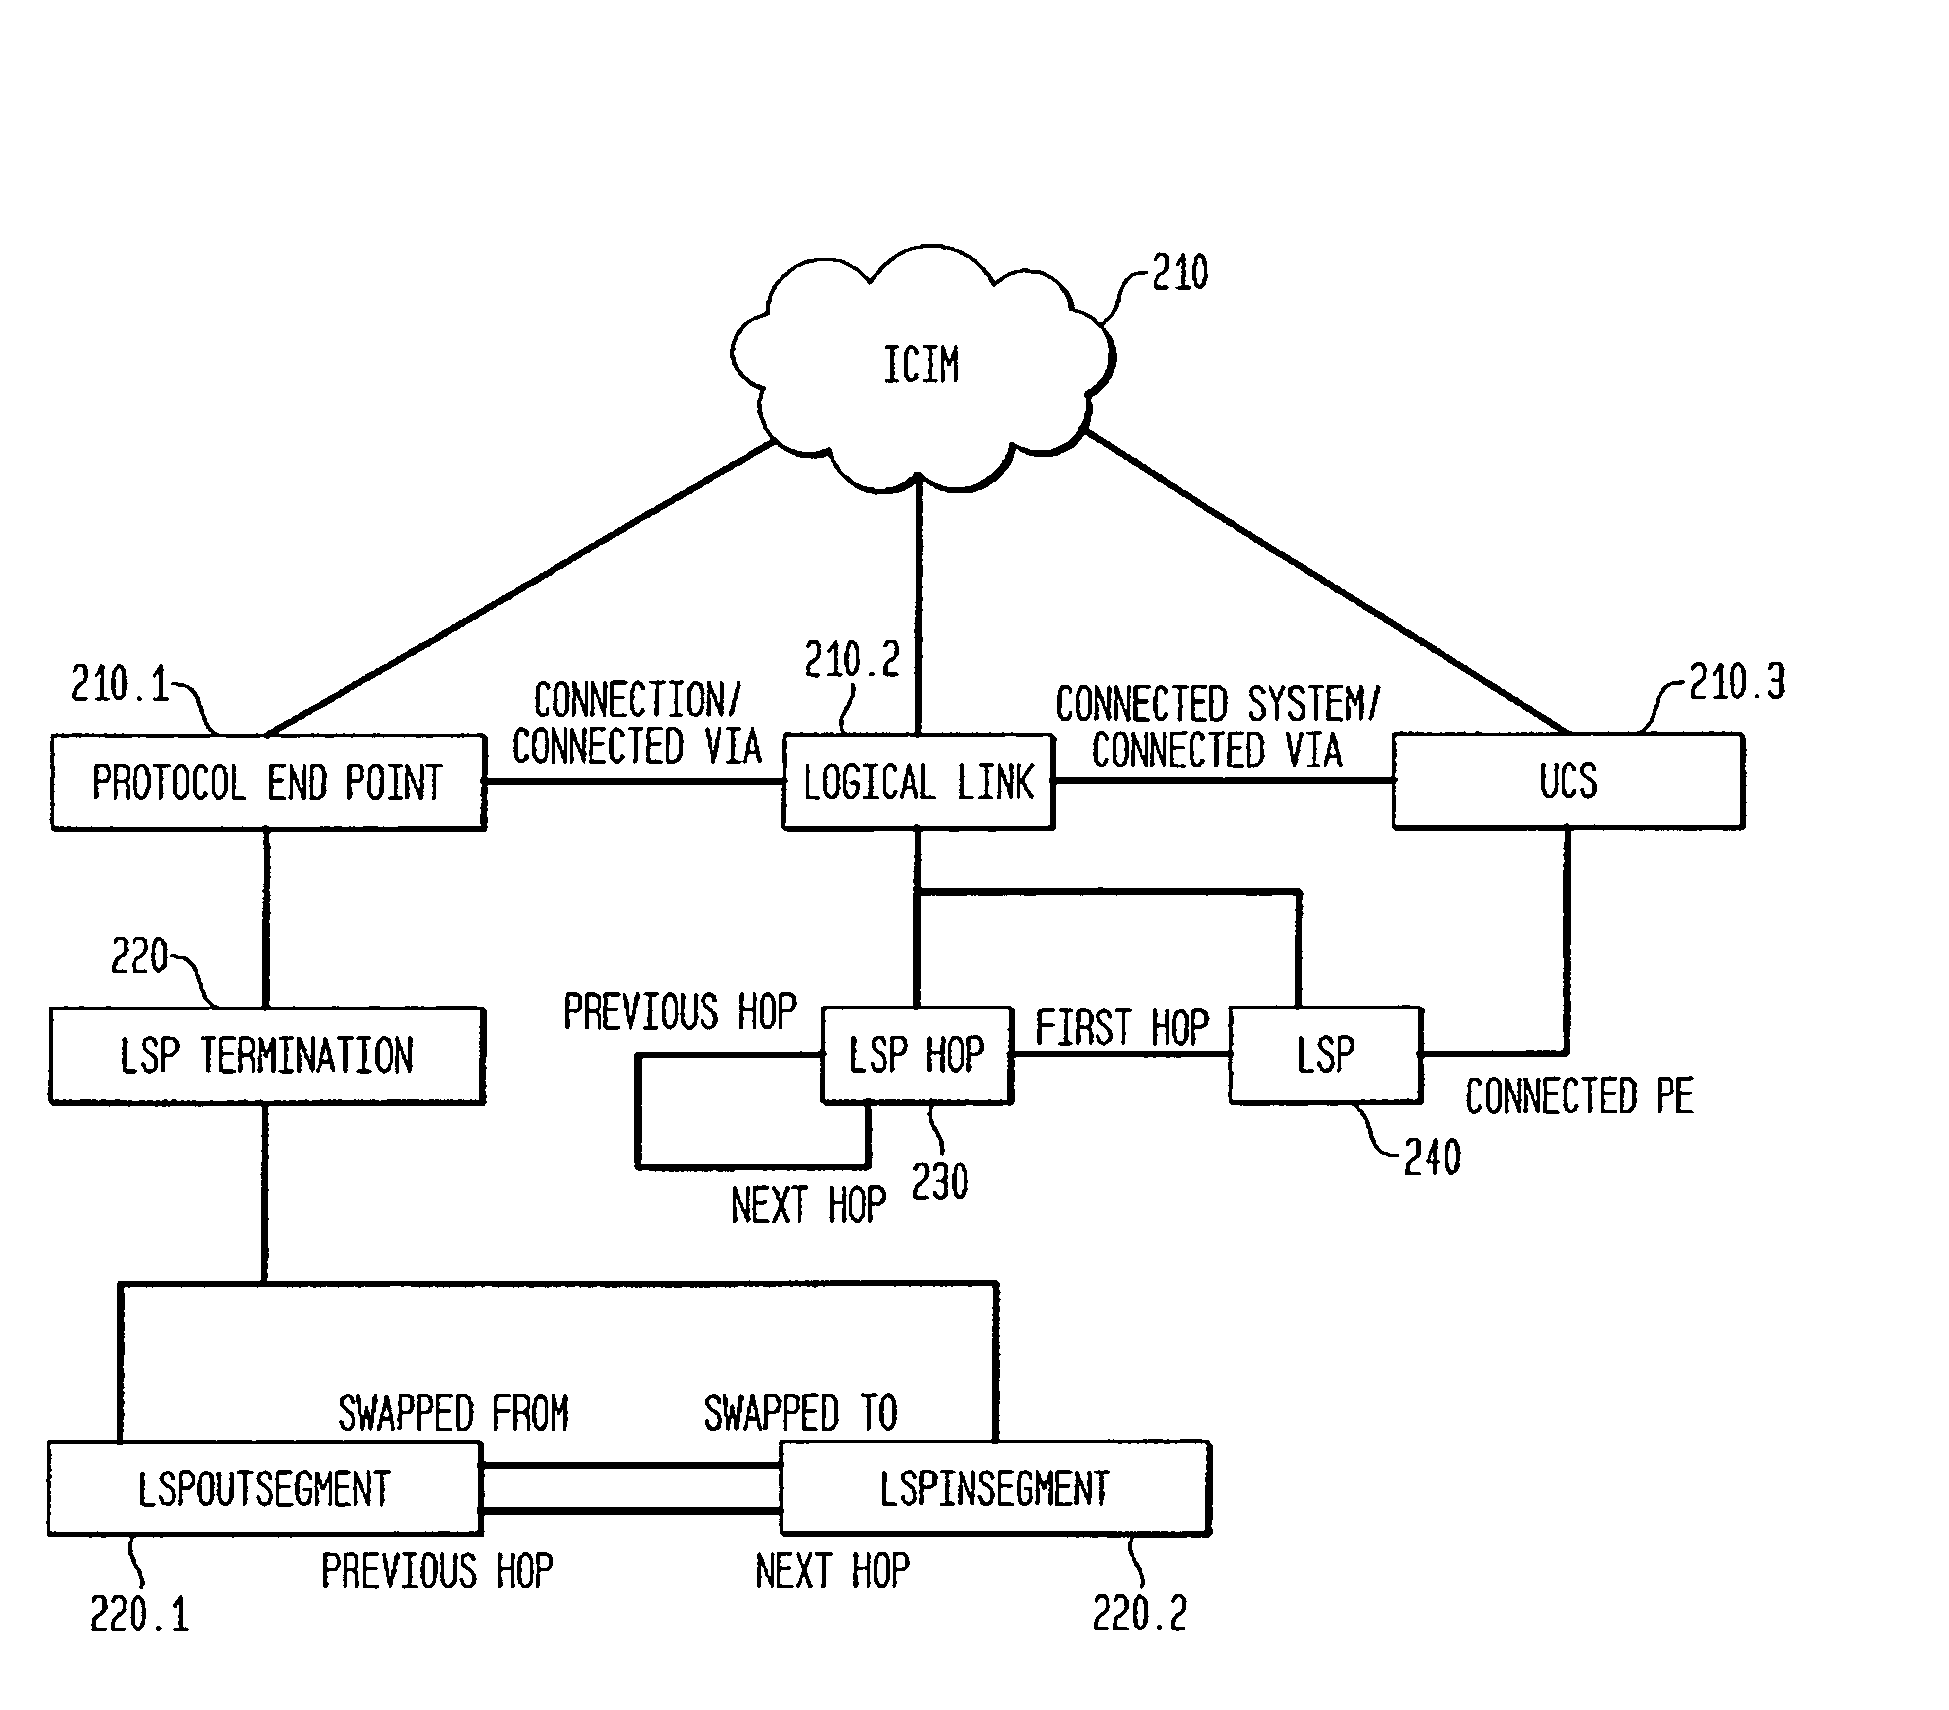 Method and apparatus for modeling and analyzing MPLS and virtual private networks